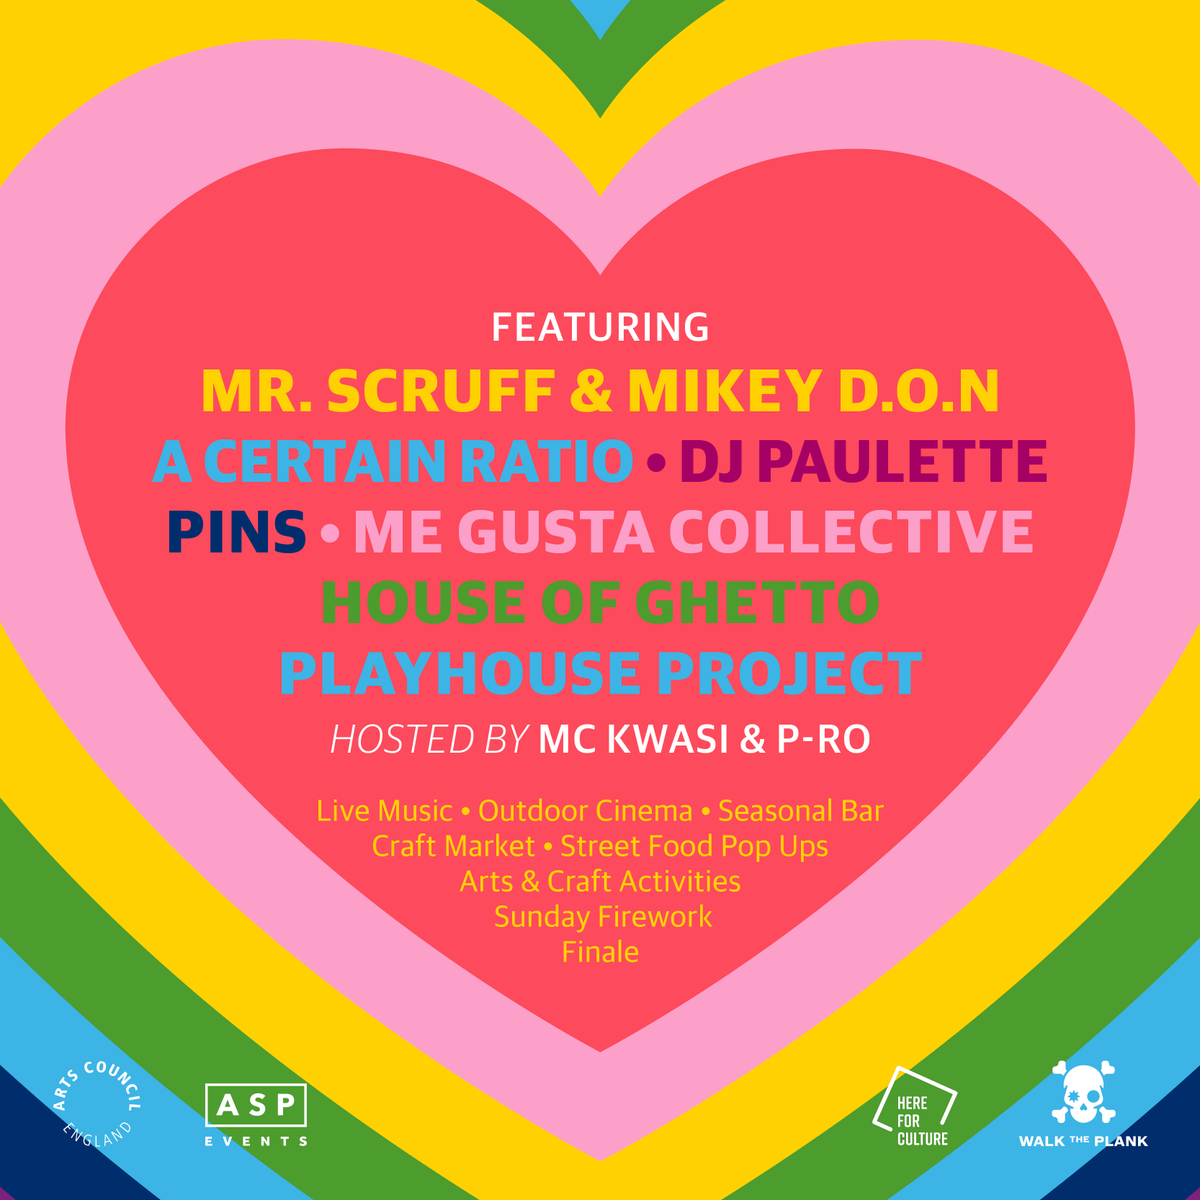 The Frost Fair is back next month @WhitworthArt on the 4 – 5 December. This year’s theme of reflection and celebration brings a musical extravaganza to our grounds, featuring Mr. Scruff & Mikey D.O.N and many more! More information to follow! #TheFrostFair #WinterOfLove